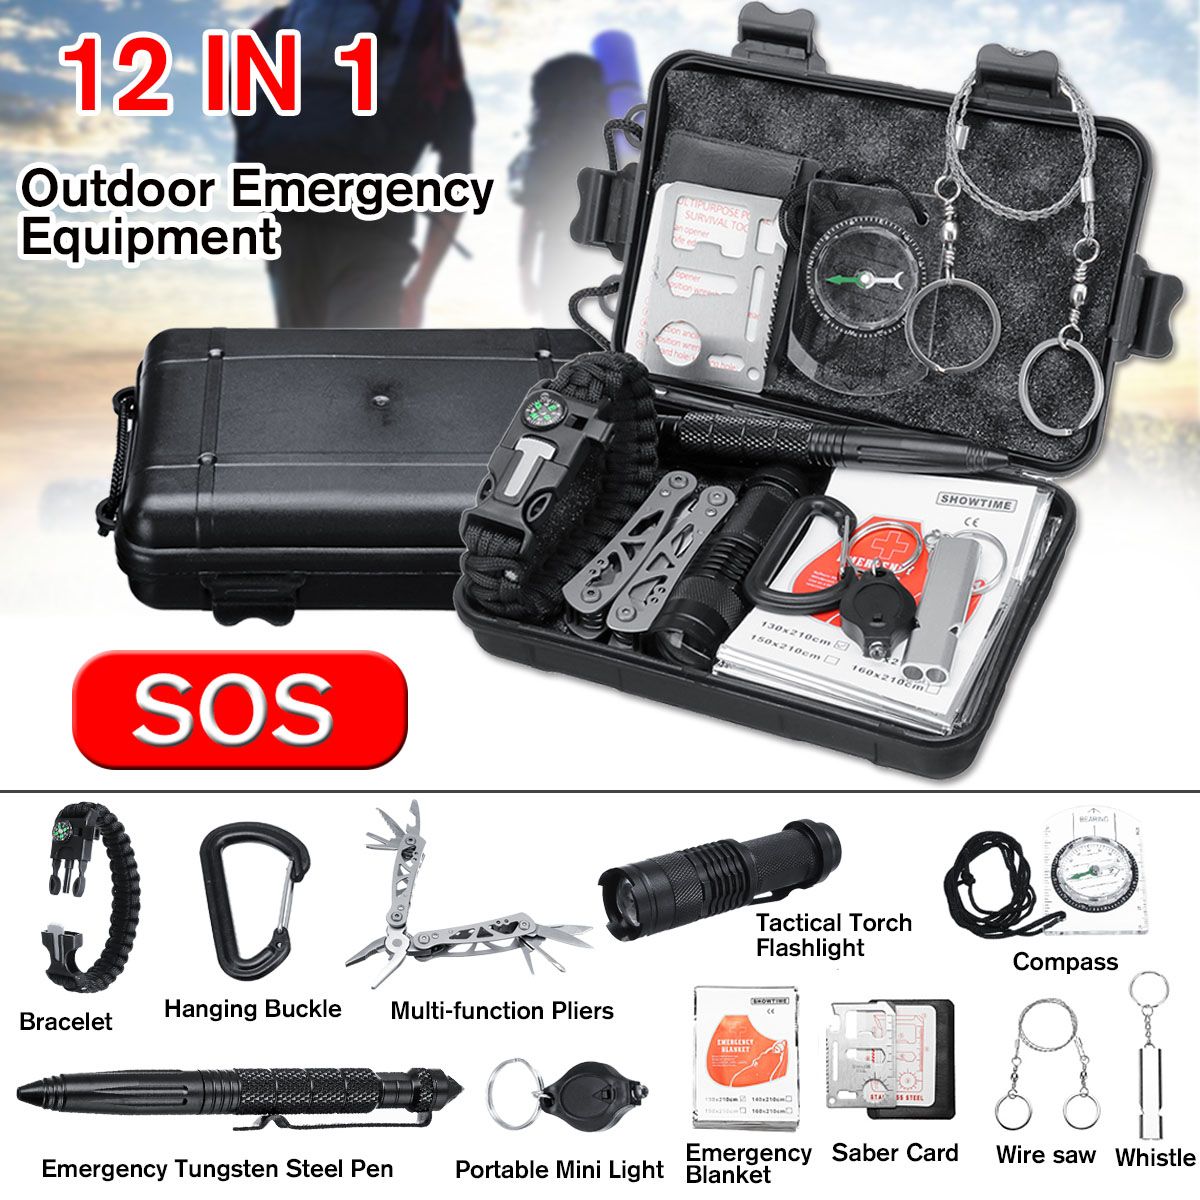 12-in-1-SOS-Outdoor-Emergency-Survival-Gear-Kit-Equipment-Box-For-Camping-Hiking-Safety-Tools-1417812